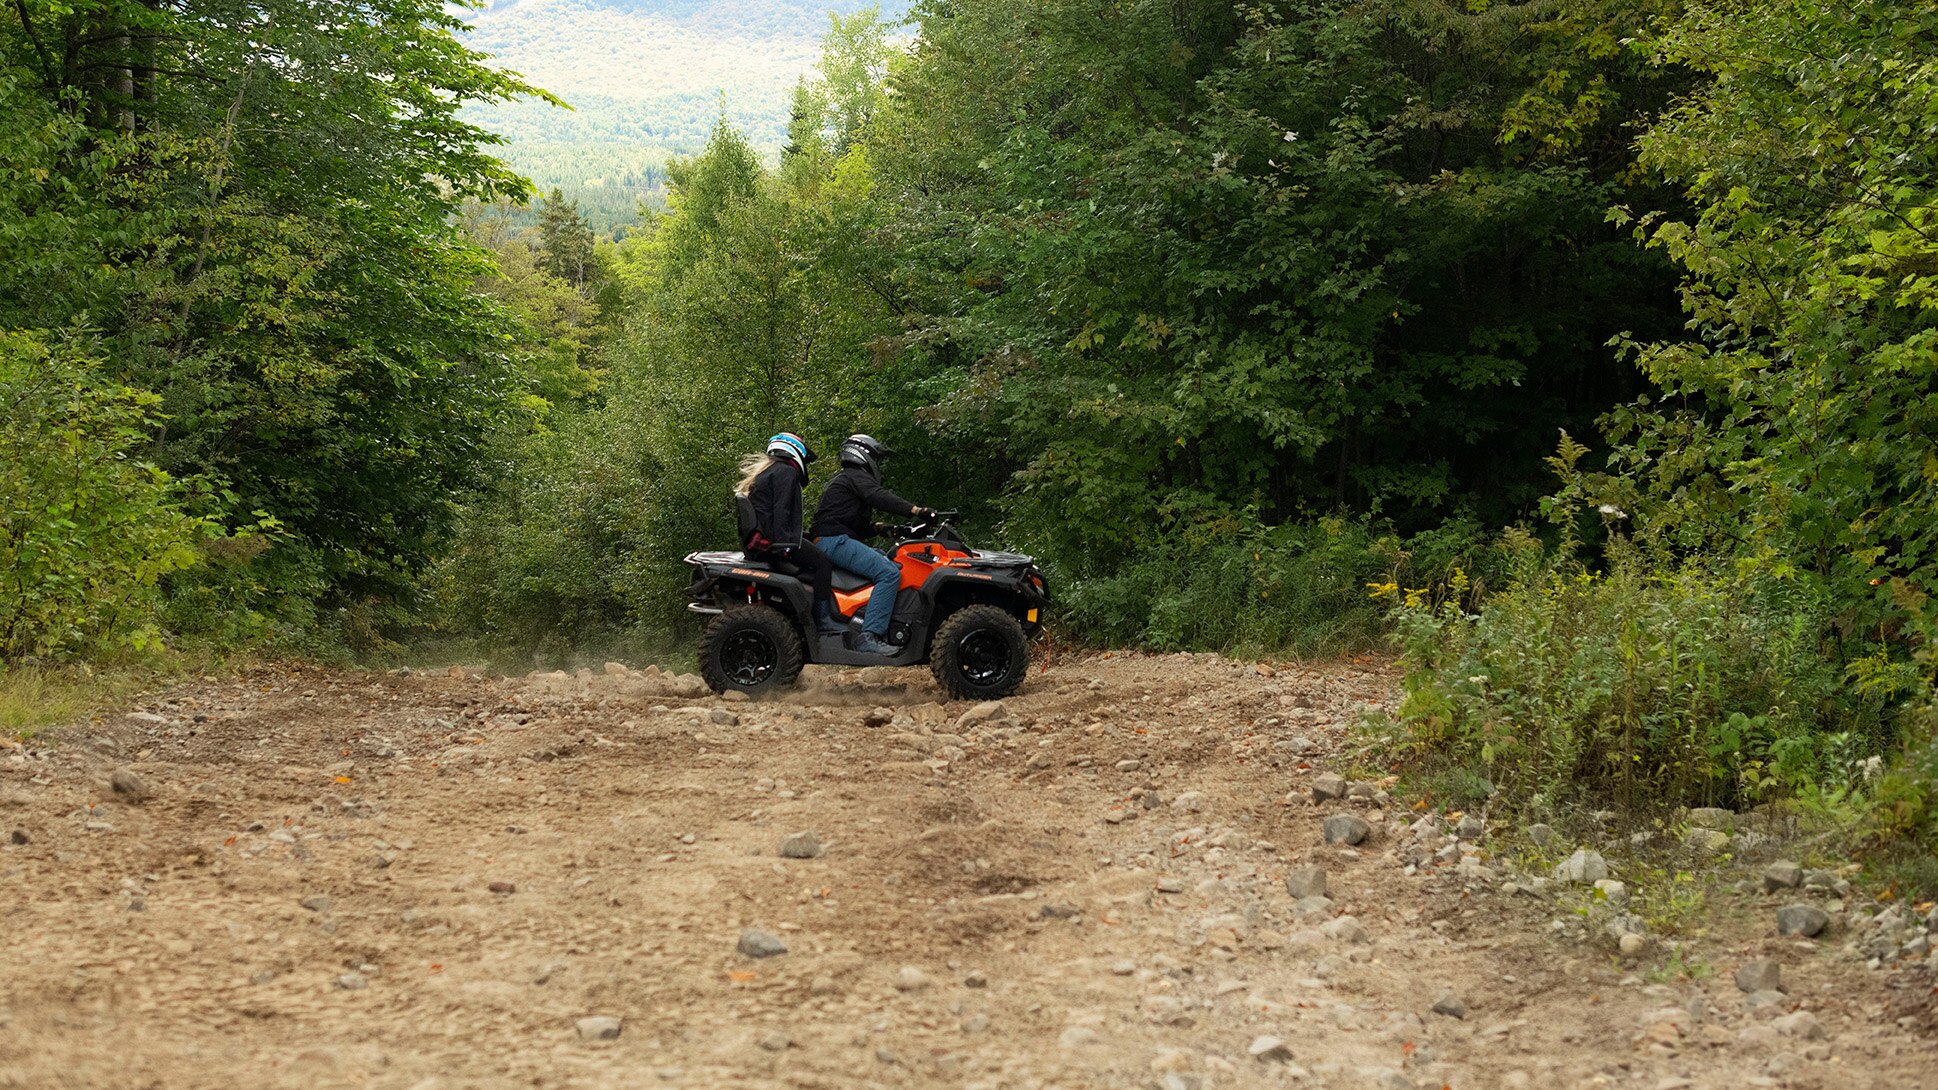 couple riding on a Can-Am ATV